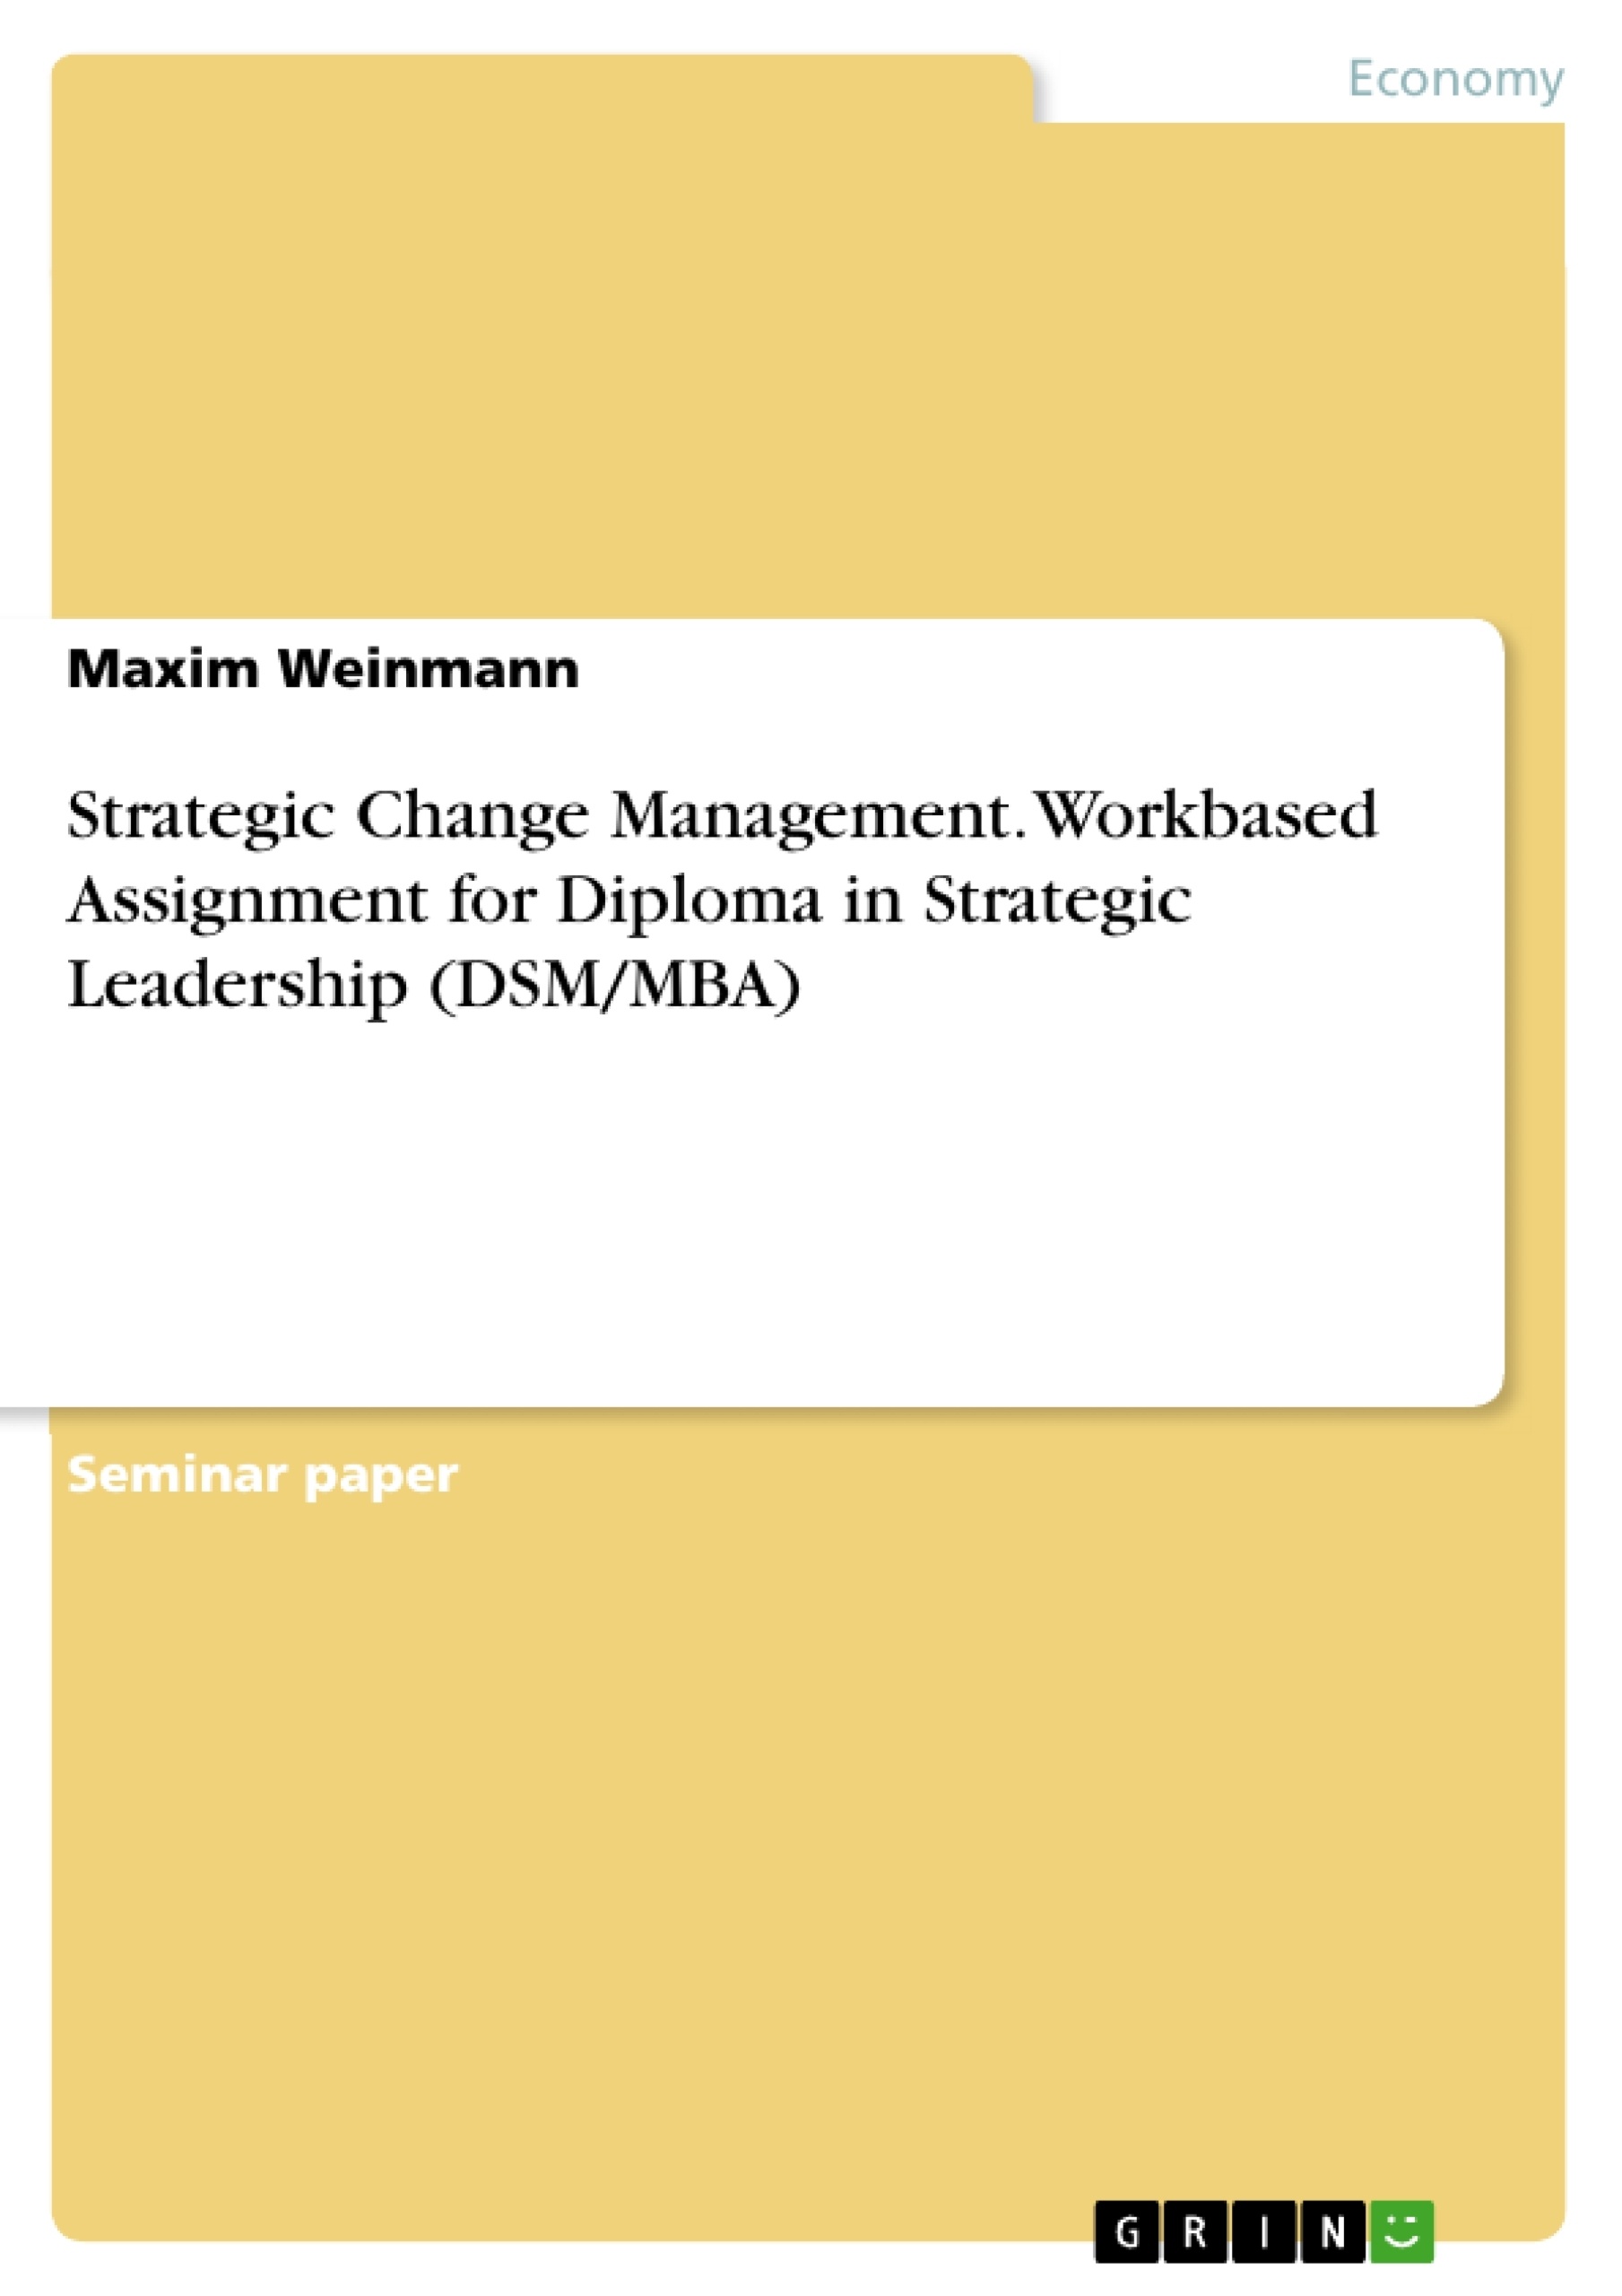 Título: Strategic Change Management. Workbased Assignment for Diploma in Strategic Leadership (DSM/MBA)